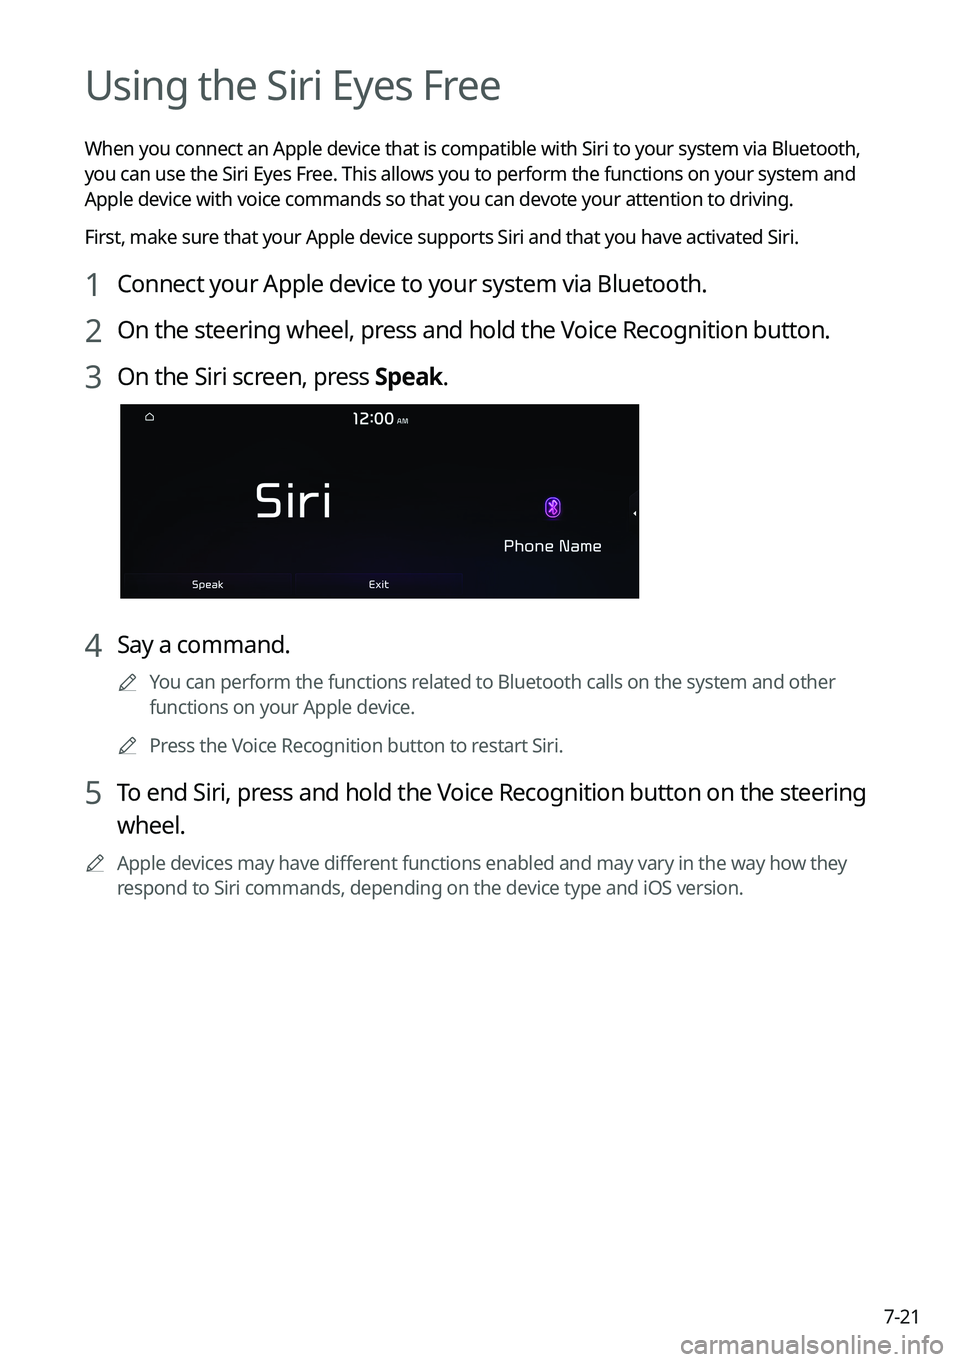 KIA SOUL 2022  Navigation System Quick Reference Guide 7-21
Using the Siri Eyes Free
When you connect an Apple device that is compatible with Siri to your system via Bluetooth, 
you can use the Siri Eyes Free. This allows you to perform the functions on y